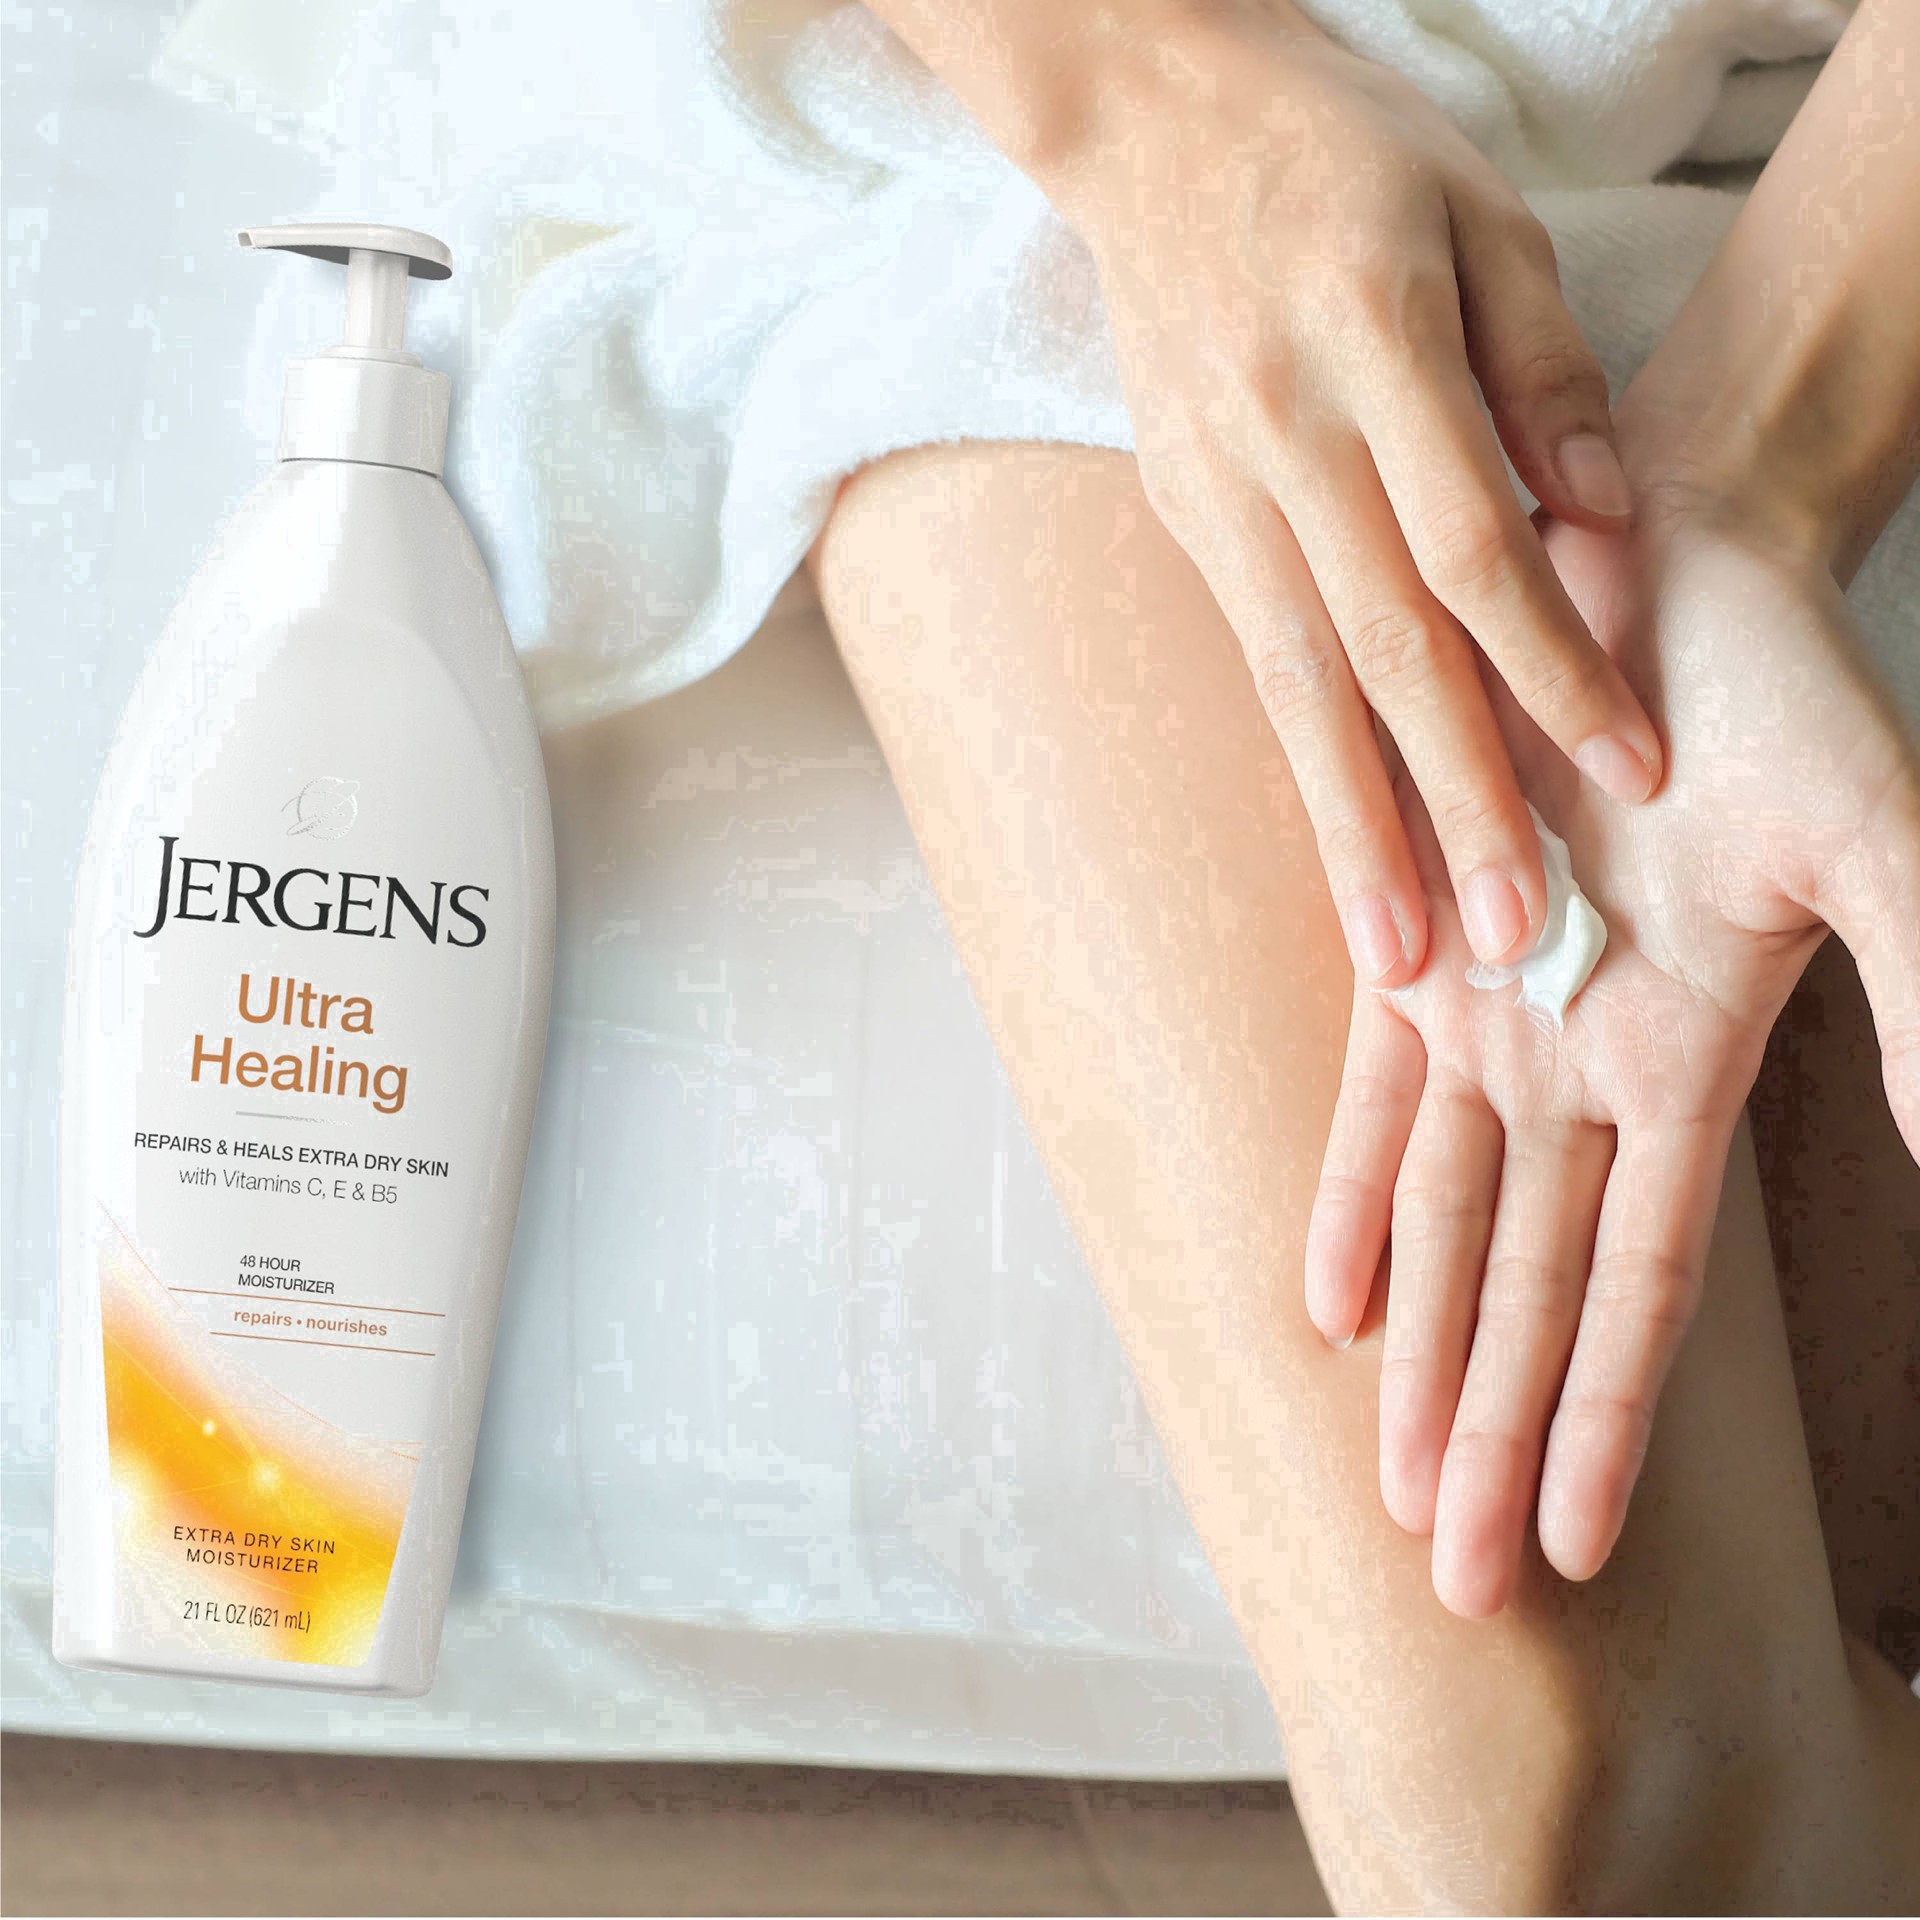 slide 27 of 67, Jergens Hand and Body Lotion, Dry Skin Moisturizer with Vitamins C,E, and B5, 21 fl oz